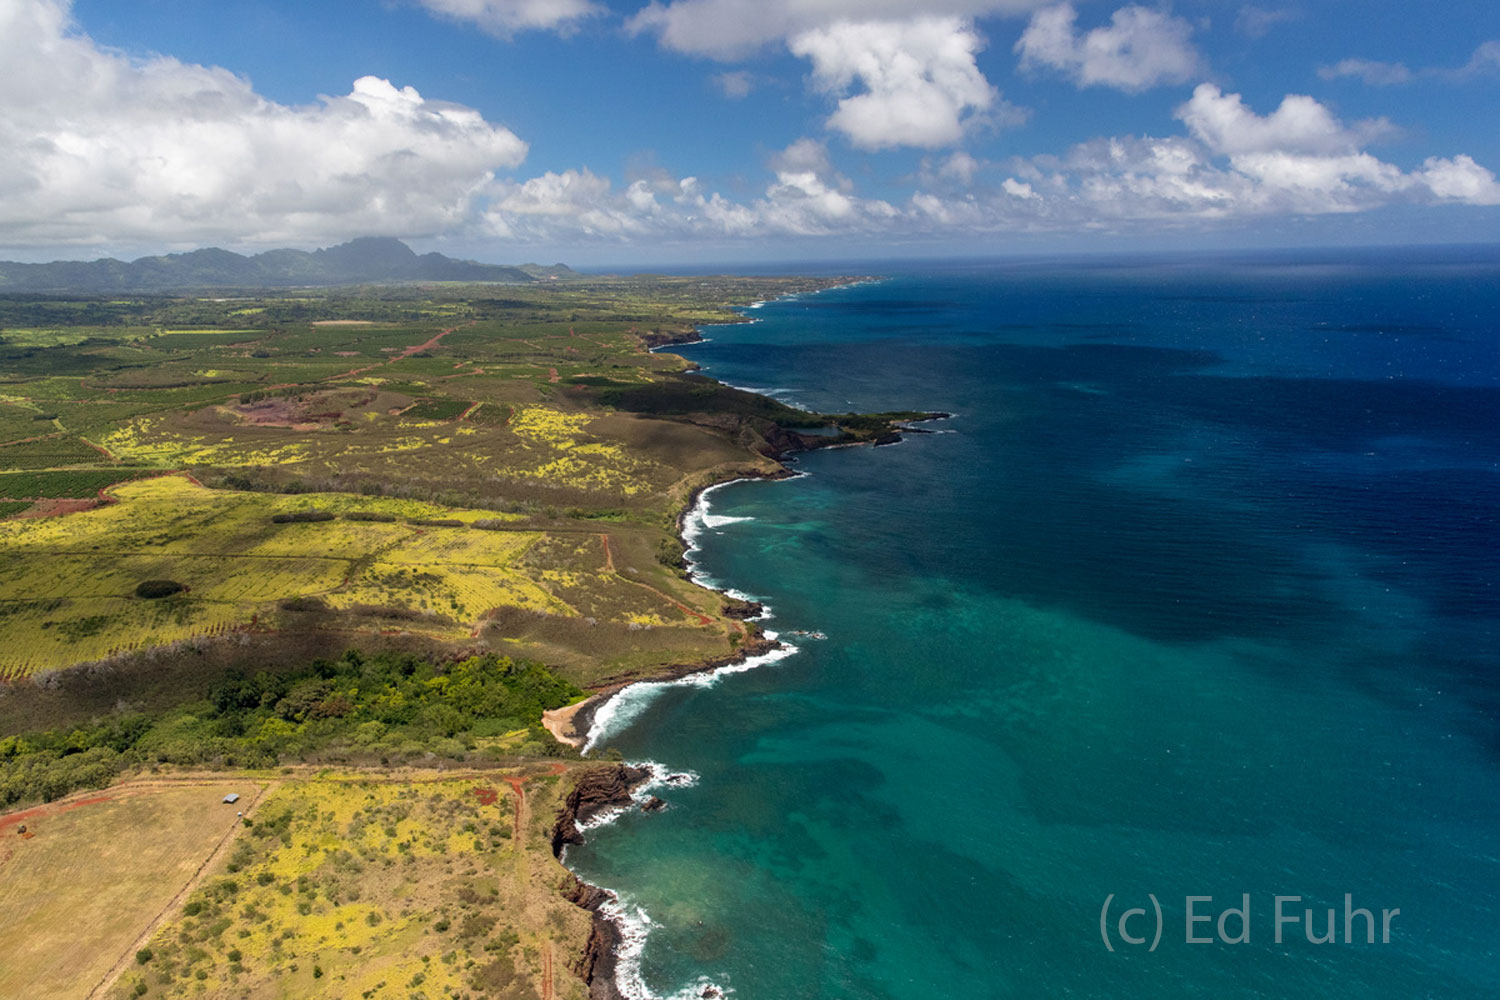 A classic view of the Kauai shore from my windowless helicopter.